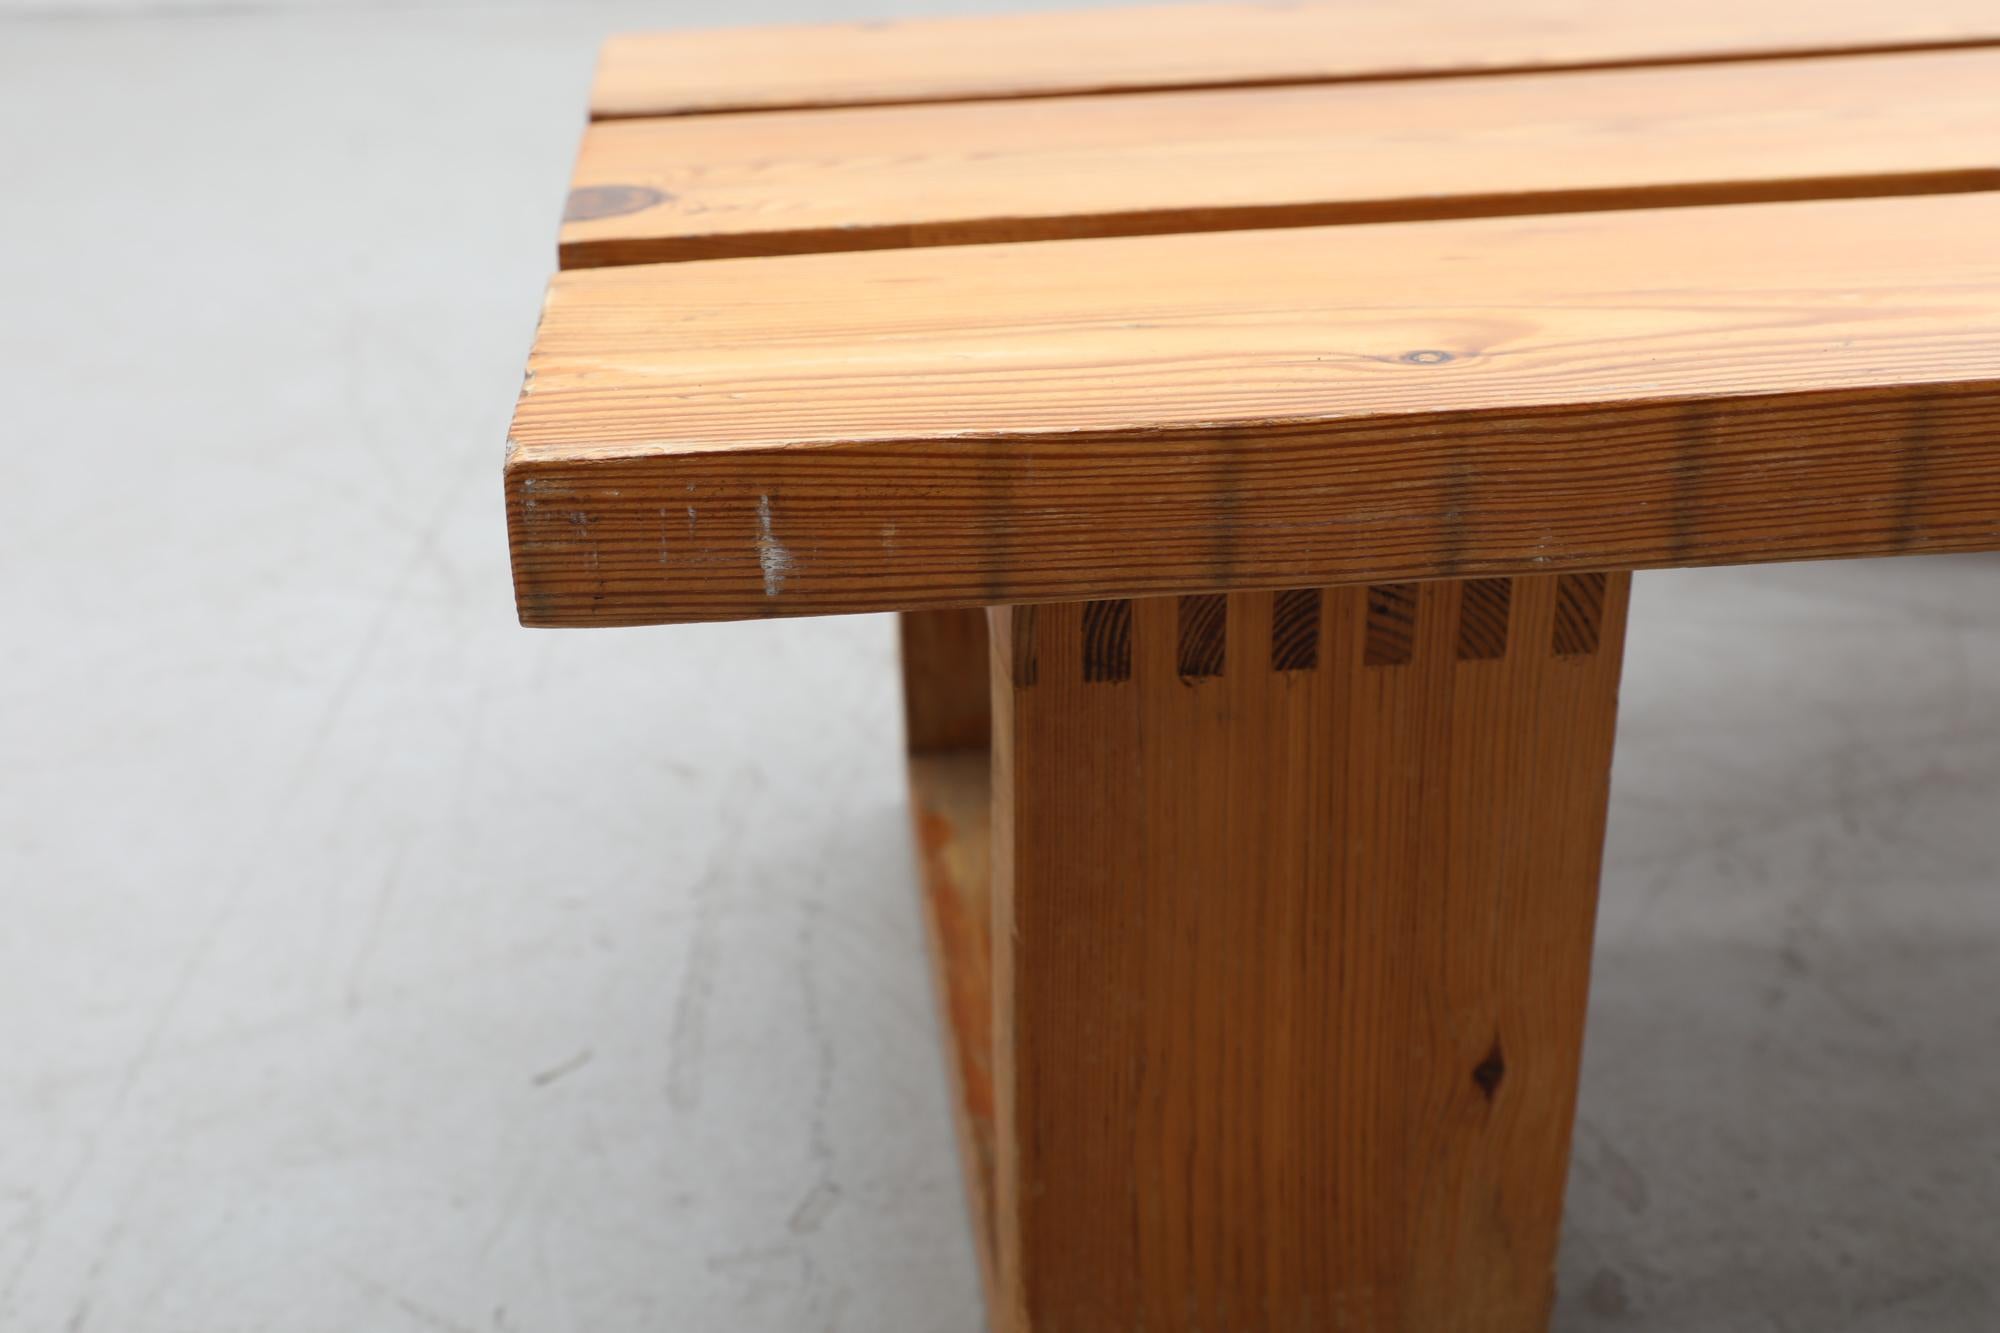 Ate van Apeldoorn Heavy Pine Slat Benches w/ Square Legs & Box Joints For Sale 7